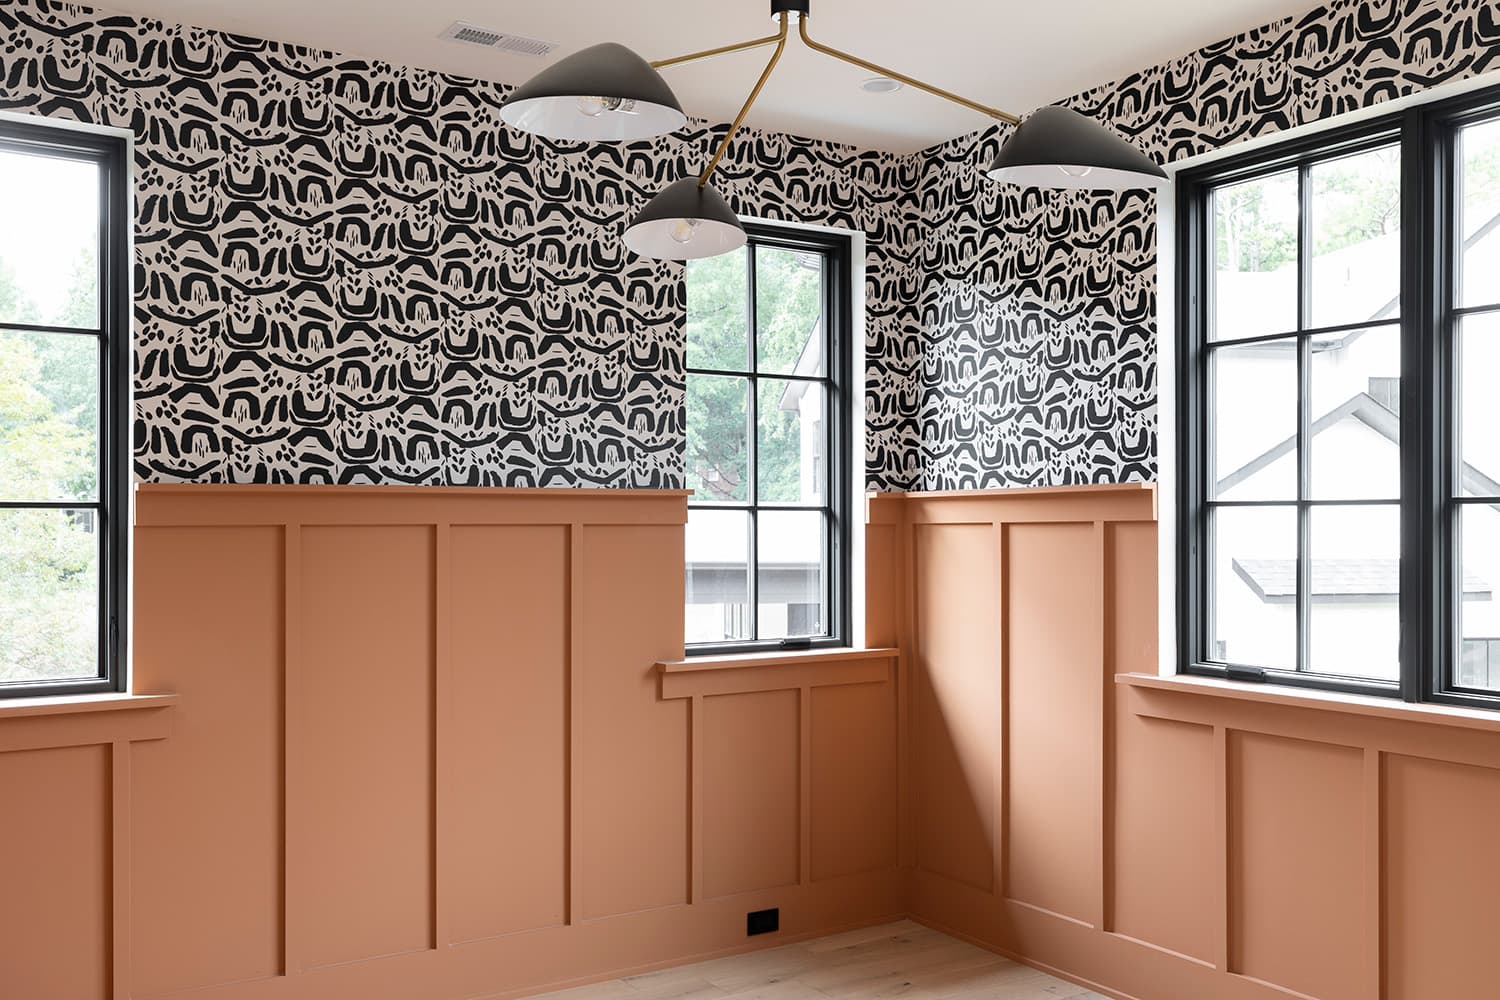 Children's bedroom with wainscoting and black and white wallpaper in luxury custom home, Charlotte, NC